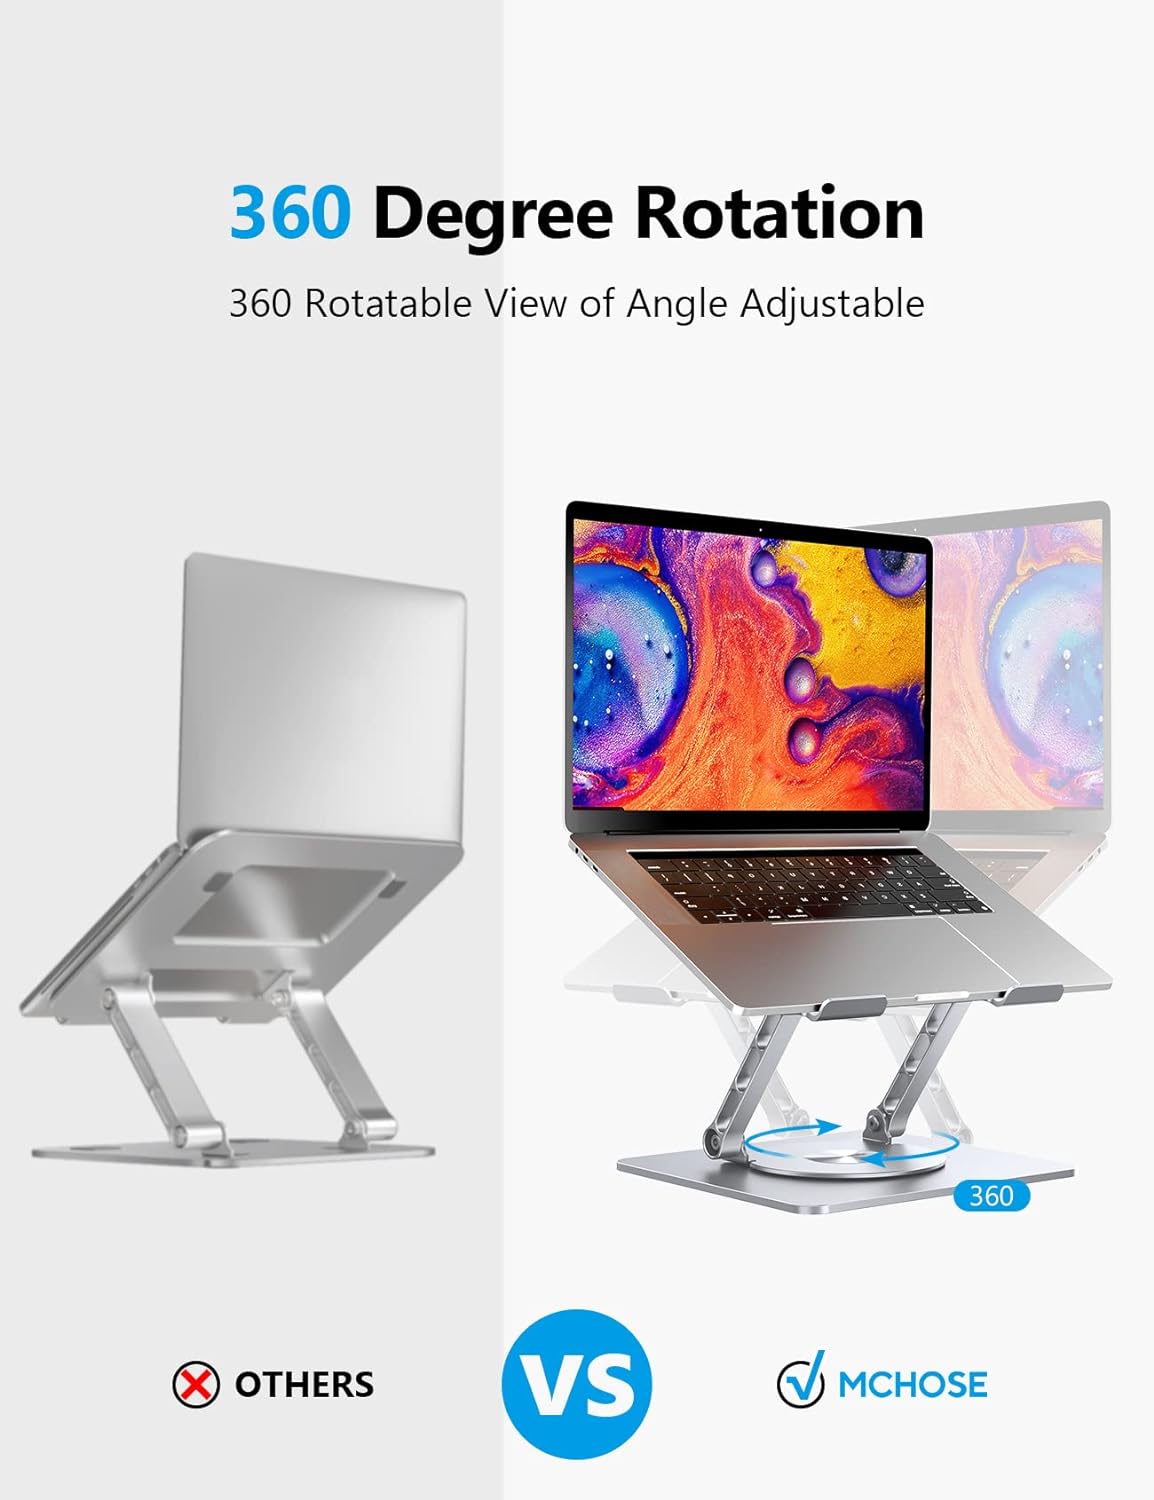 Laptop Stand, Adjustable Laptop Holder with 360° Rotating Base, Foldable Laptop Riser Compatible for MacBook Pro/Air, Surface Laptop up to 15.6 inches, Space Grey